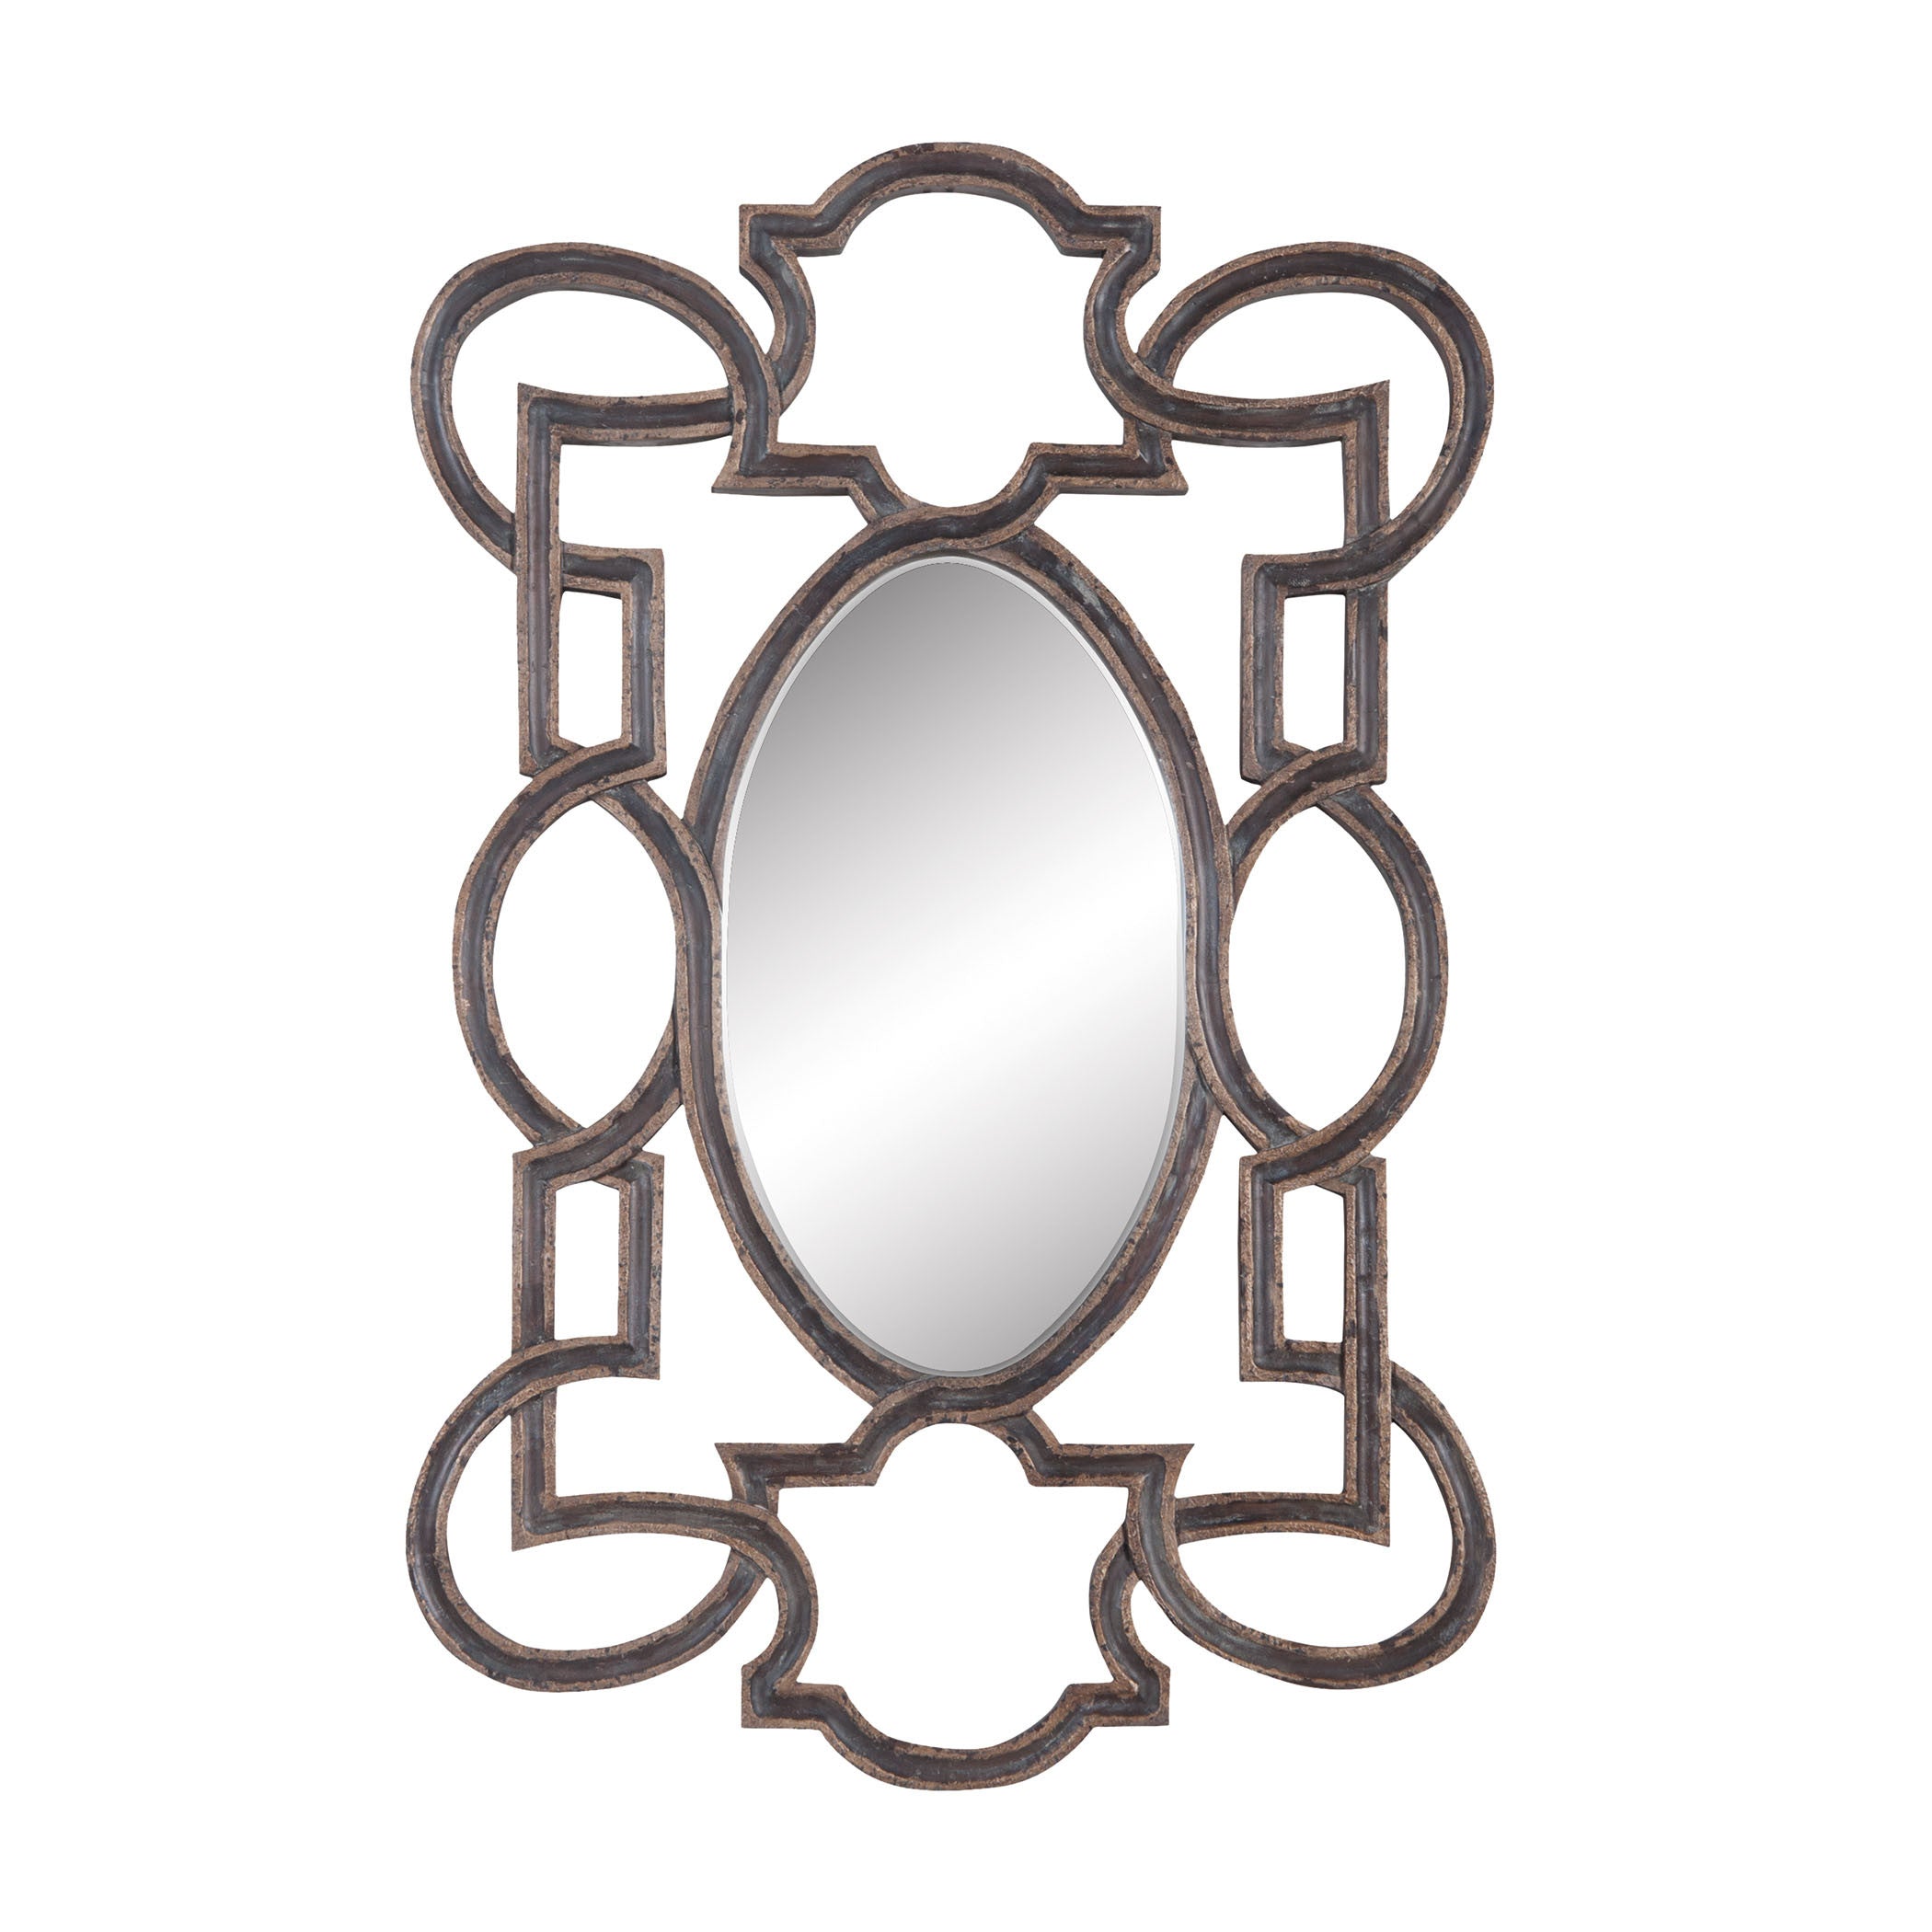 Guildmaster Gui-104004 Somerset Collection Heritage Grey Stain,champagne Finish Mirror